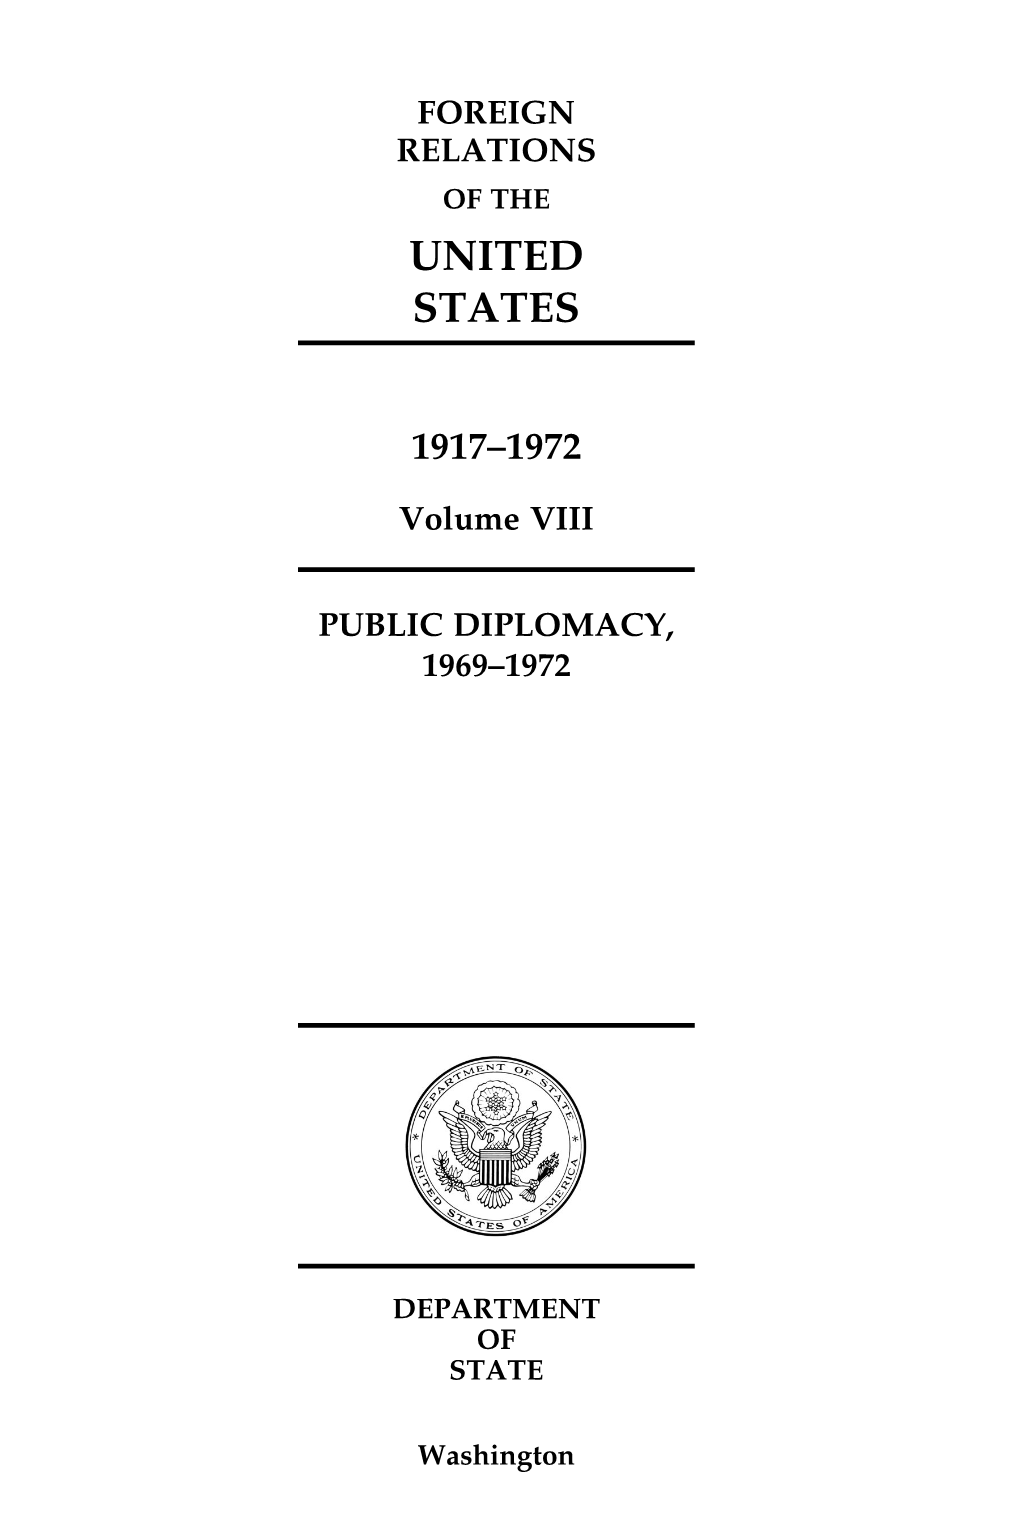 Foreign Relations of the United States, 1917–1972